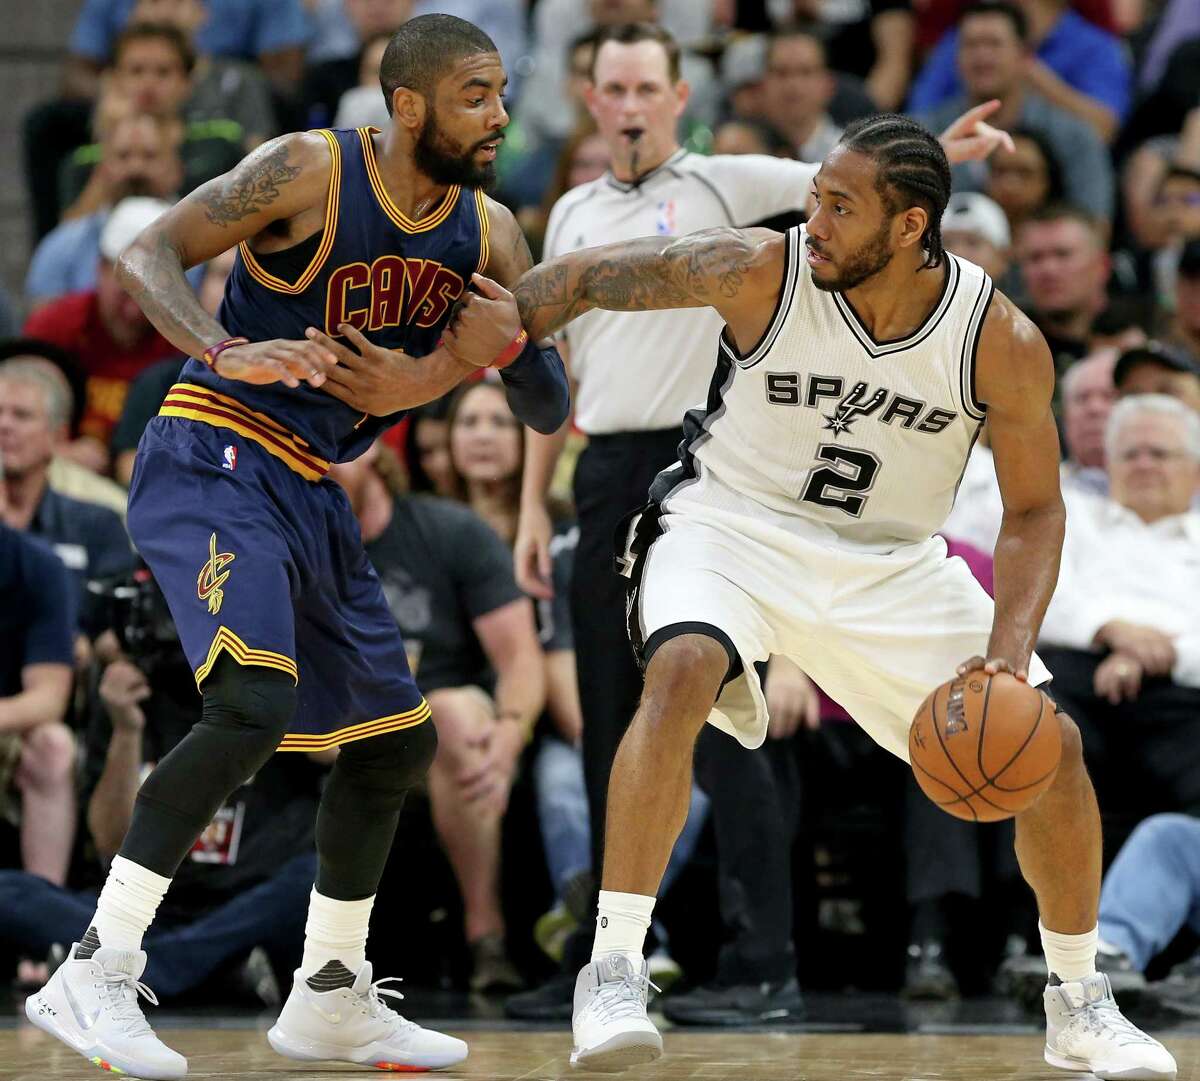 Spurs’ Kawhi Leonard looks for room around the Cleveland Cavaliers’ Kyrie Irving during second half action on March 27, 2017 at the AT&T Center.